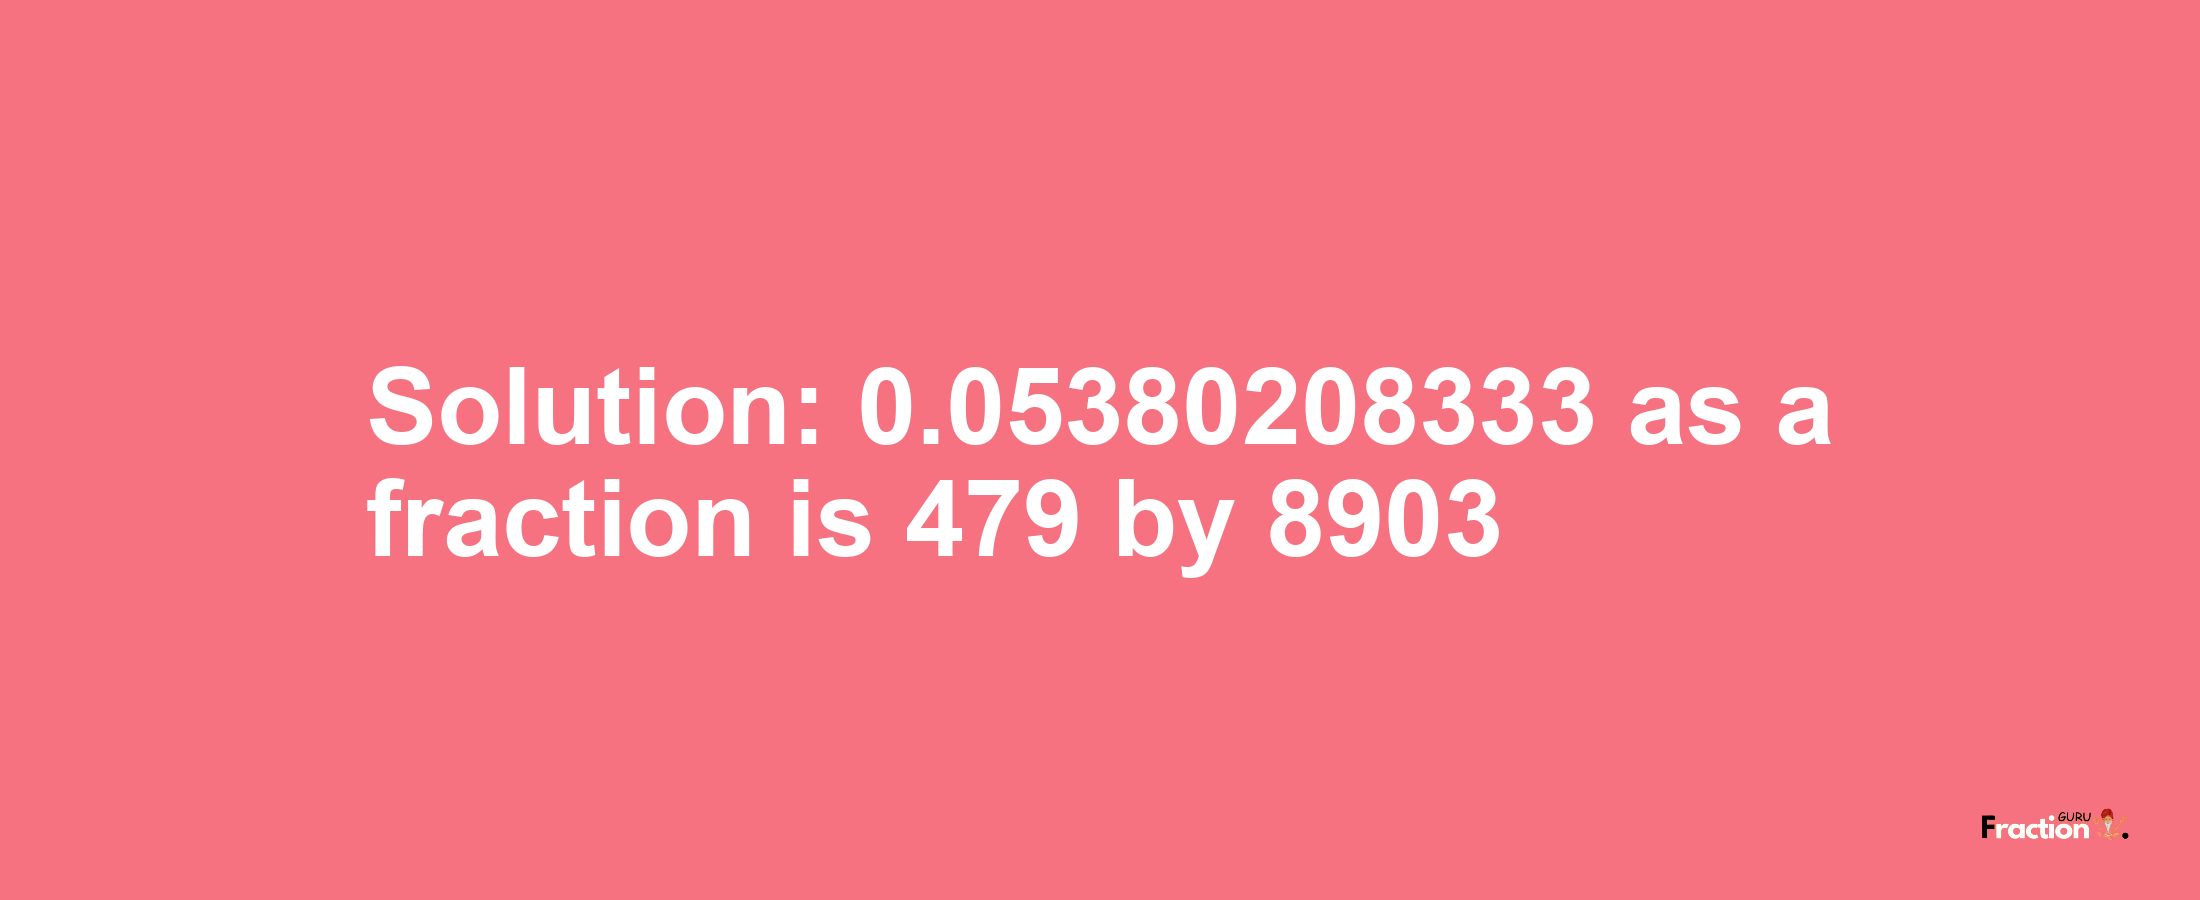 Solution:0.05380208333 as a fraction is 479/8903